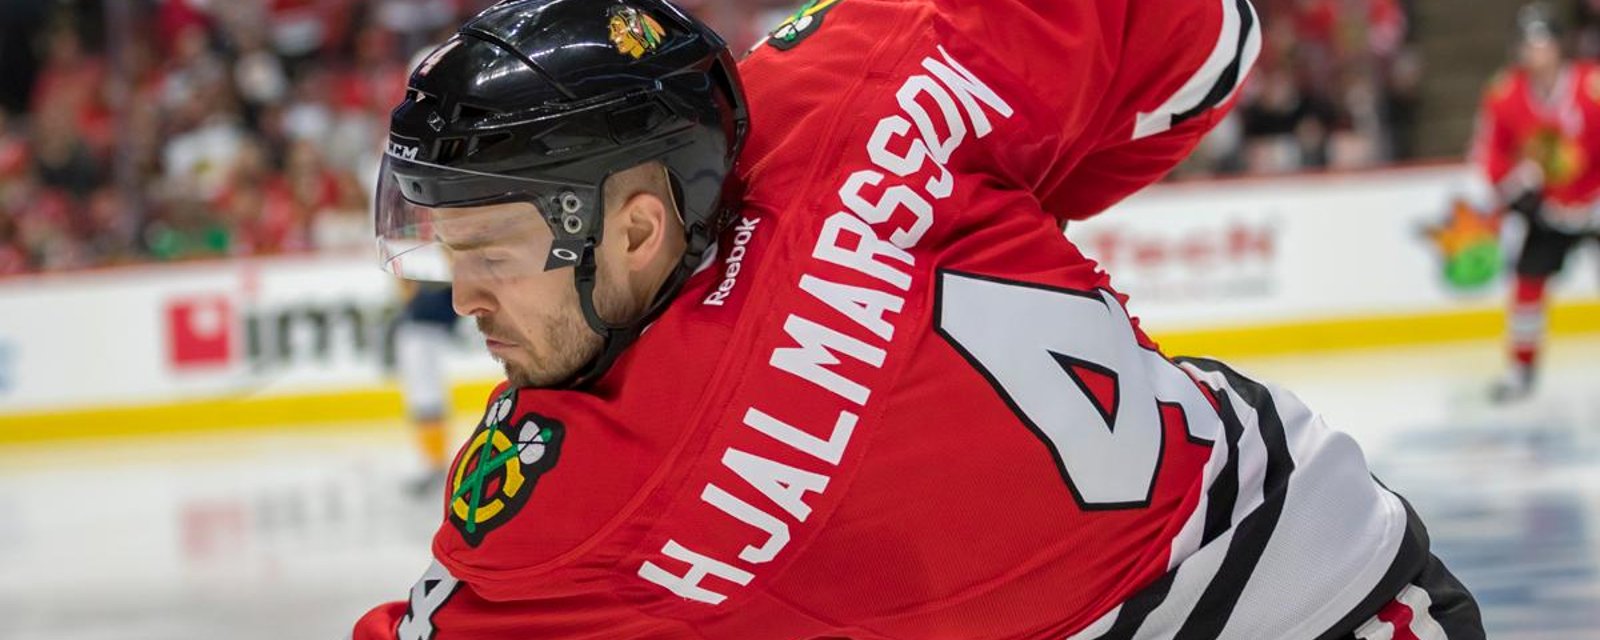 Hjalmarsson reacts to leaving Chicago in humble, emotional way. 